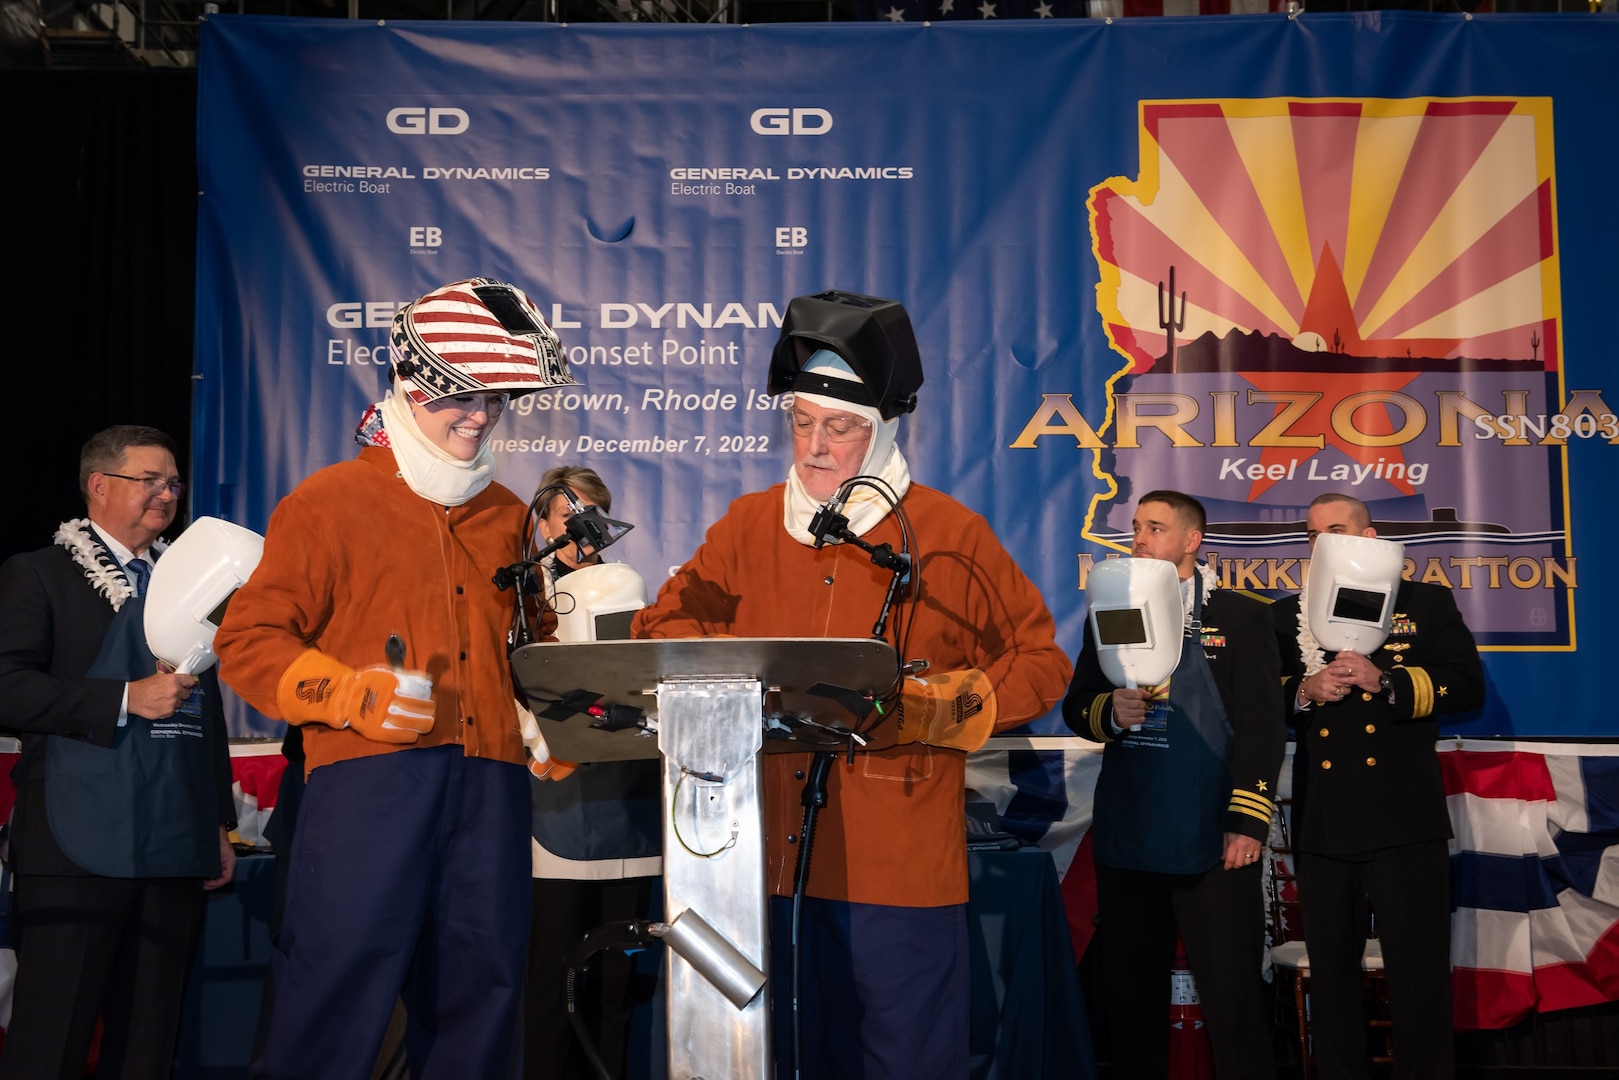 Ship Sponsor Nikki Stratton (left foreground) and Electric Boat welder Bob Hobday (right foreground) prepare to weld Stratton's initials into a plate that will be placed on the future USS Arizona (SSN 803), during the boat's keel authentication ceremony at the Electric Boat Quonset Point Facility in North Kingstown, R.I., Dec. 7.